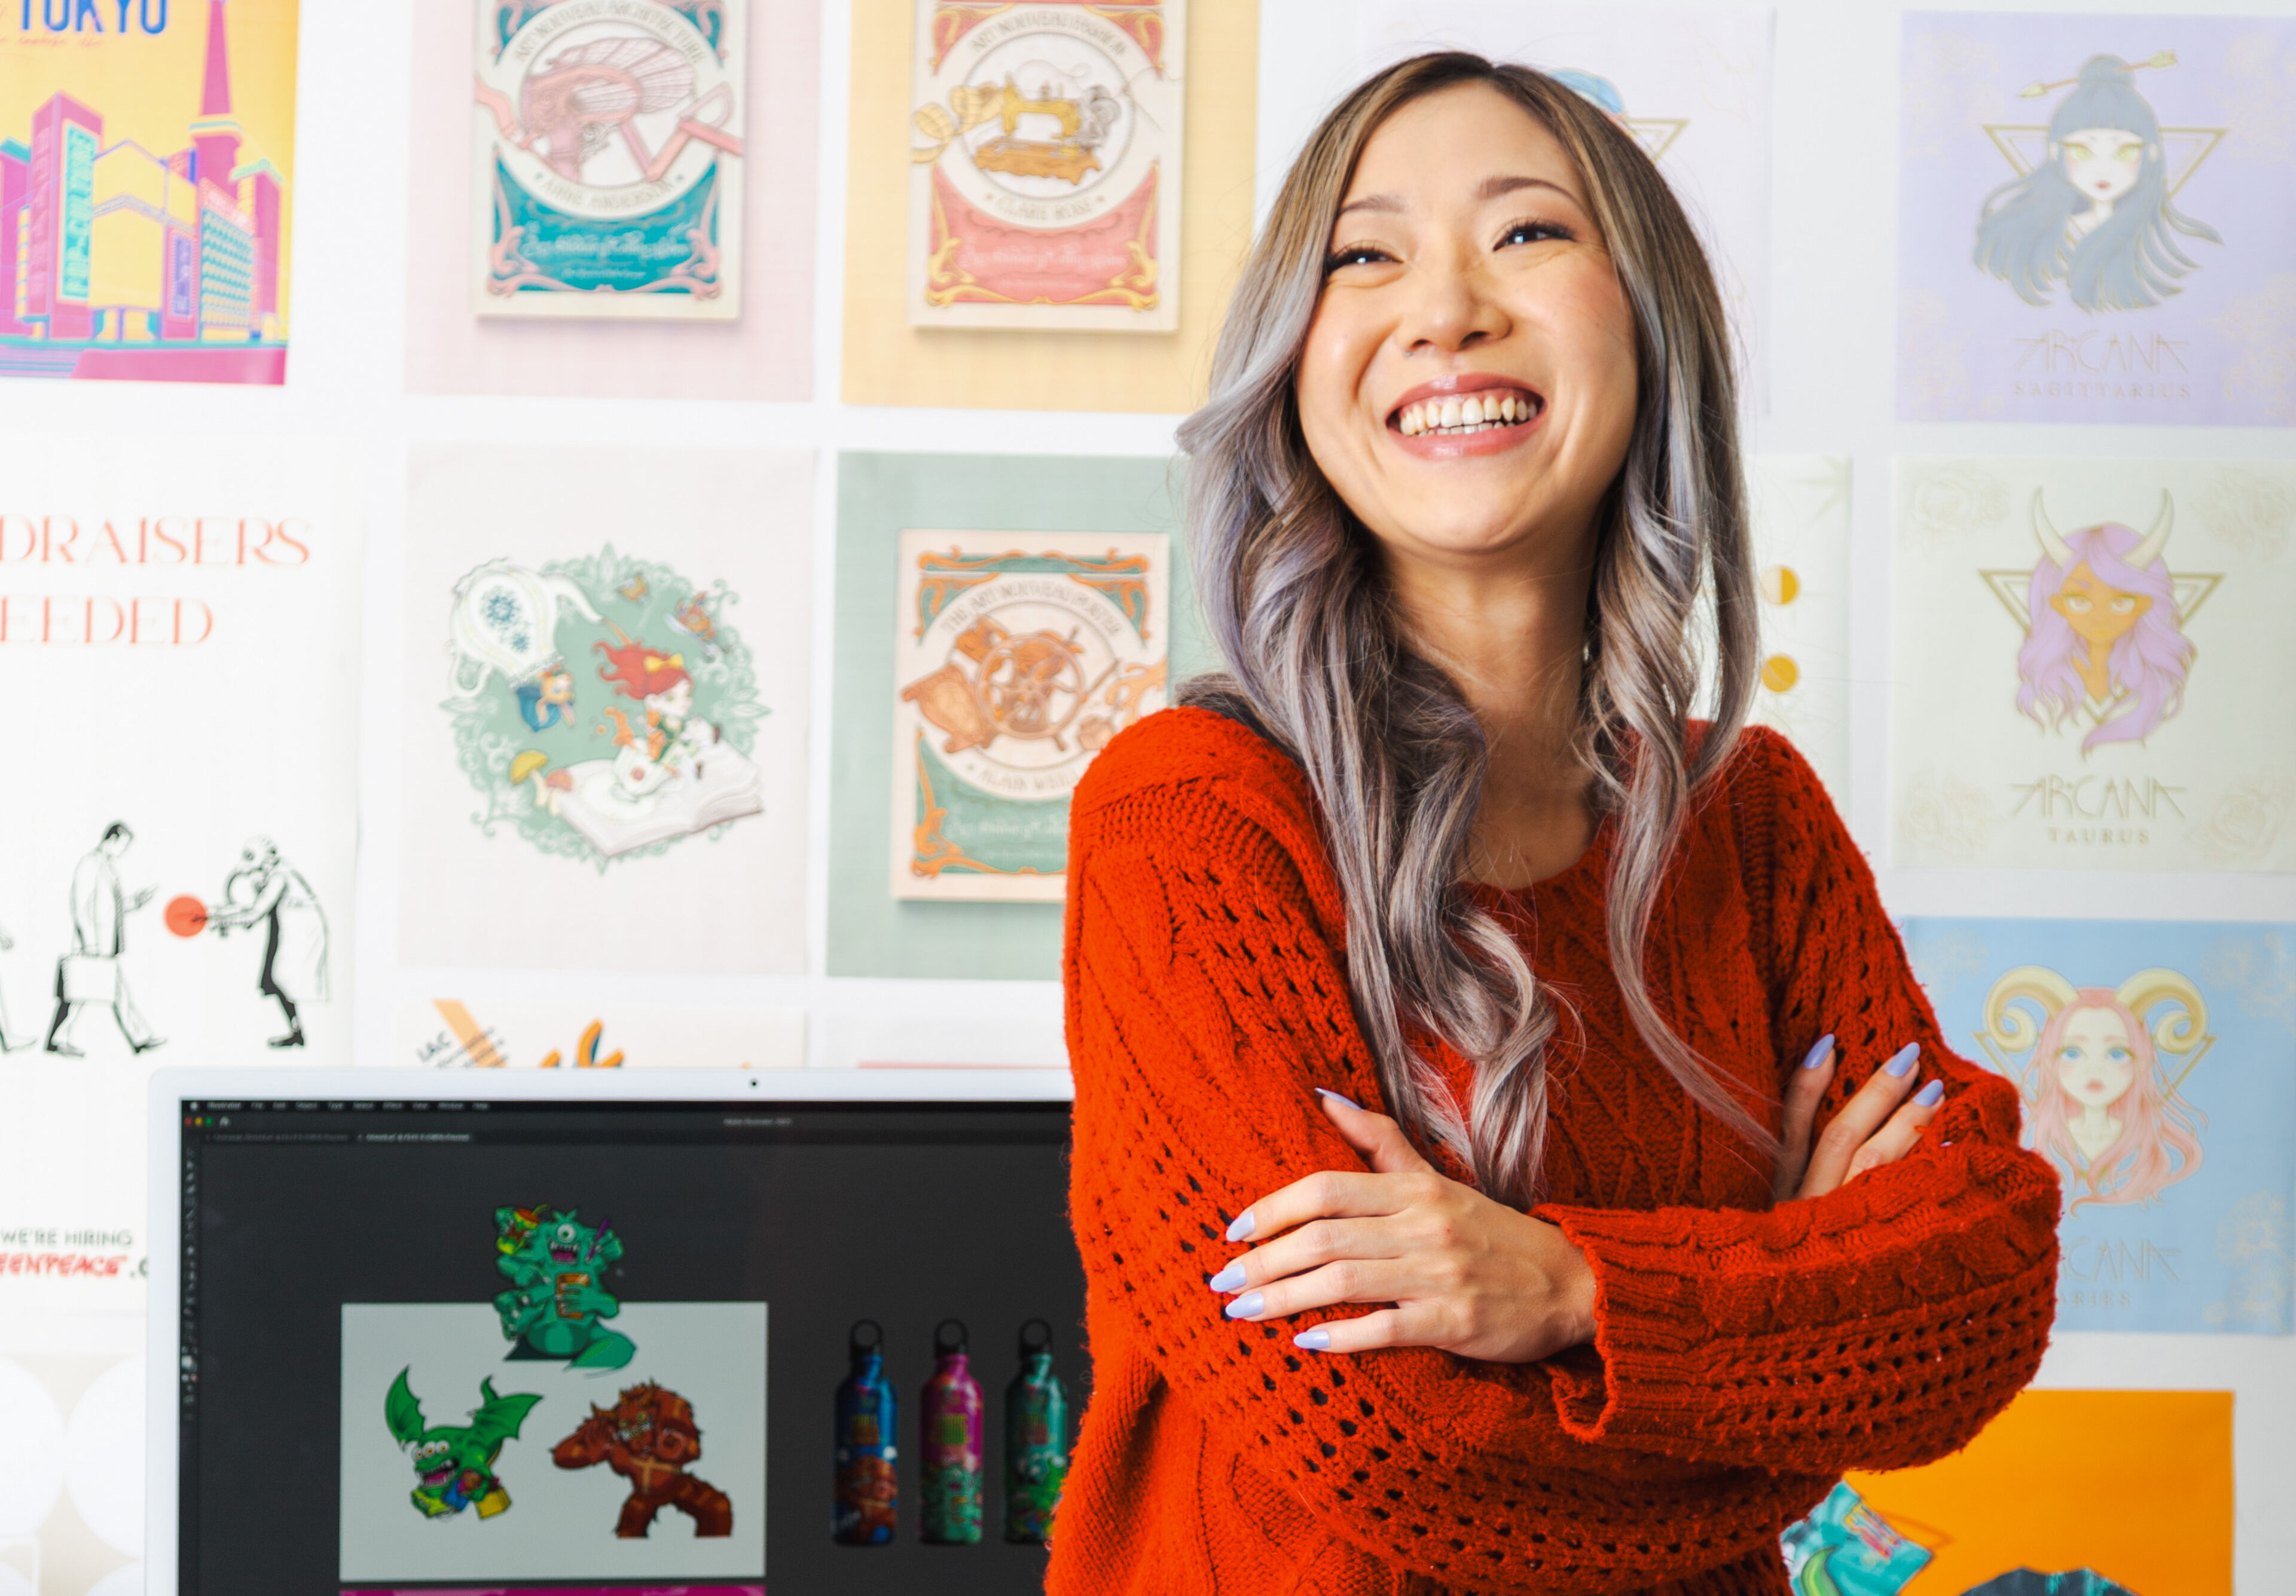 A joyful artist with silver hair in a red sweater stands in her studio surrounded by colorful illustrations.